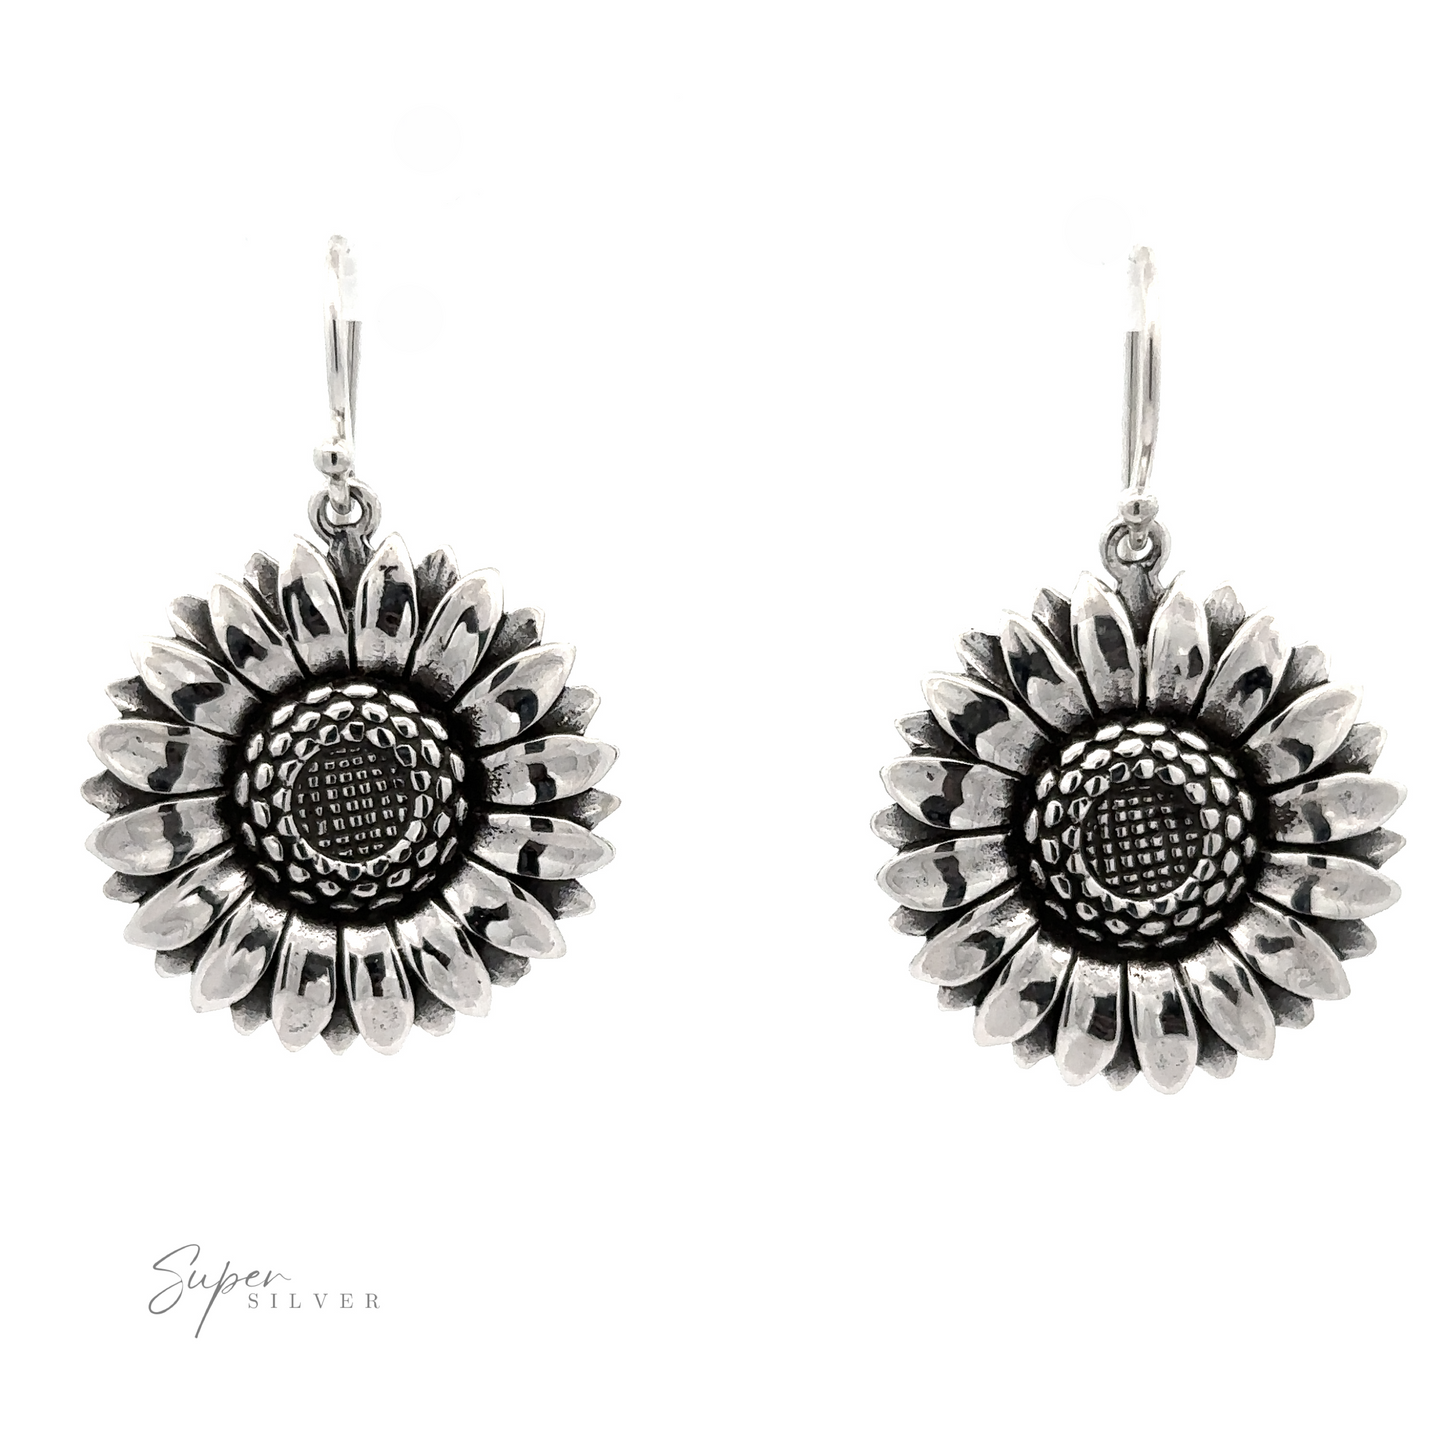 
                  
                    A pair of Silver Sunflower Earrings with detailed petal and center textures, displayed against a white background.
                  
                